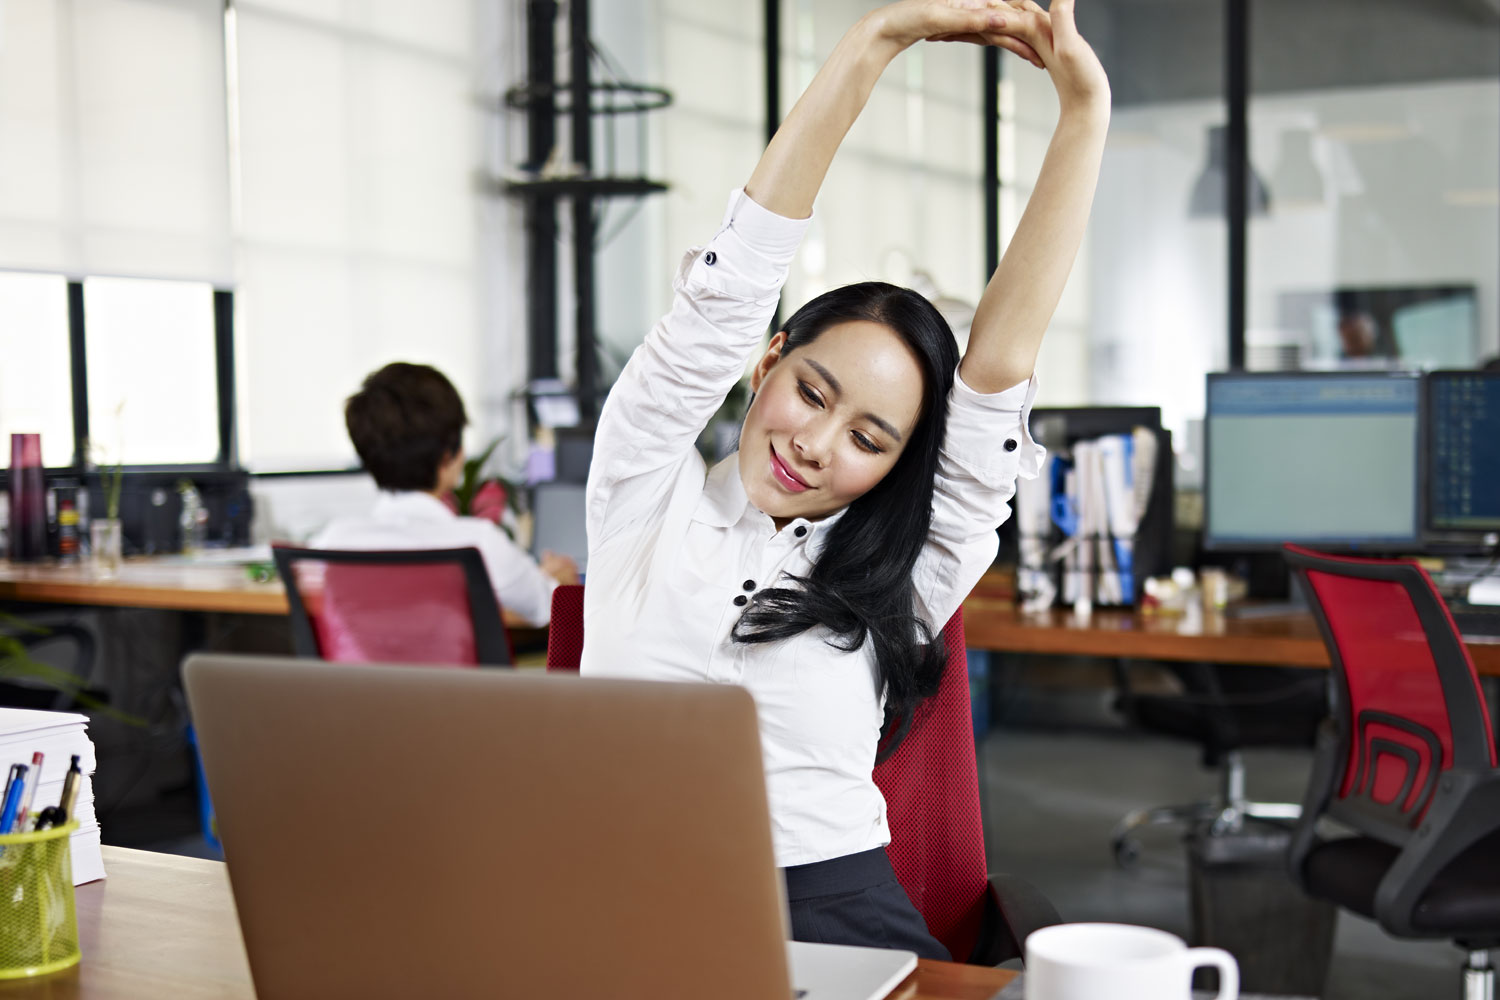 7 Benefits of Workplace Health and Wellness Programs